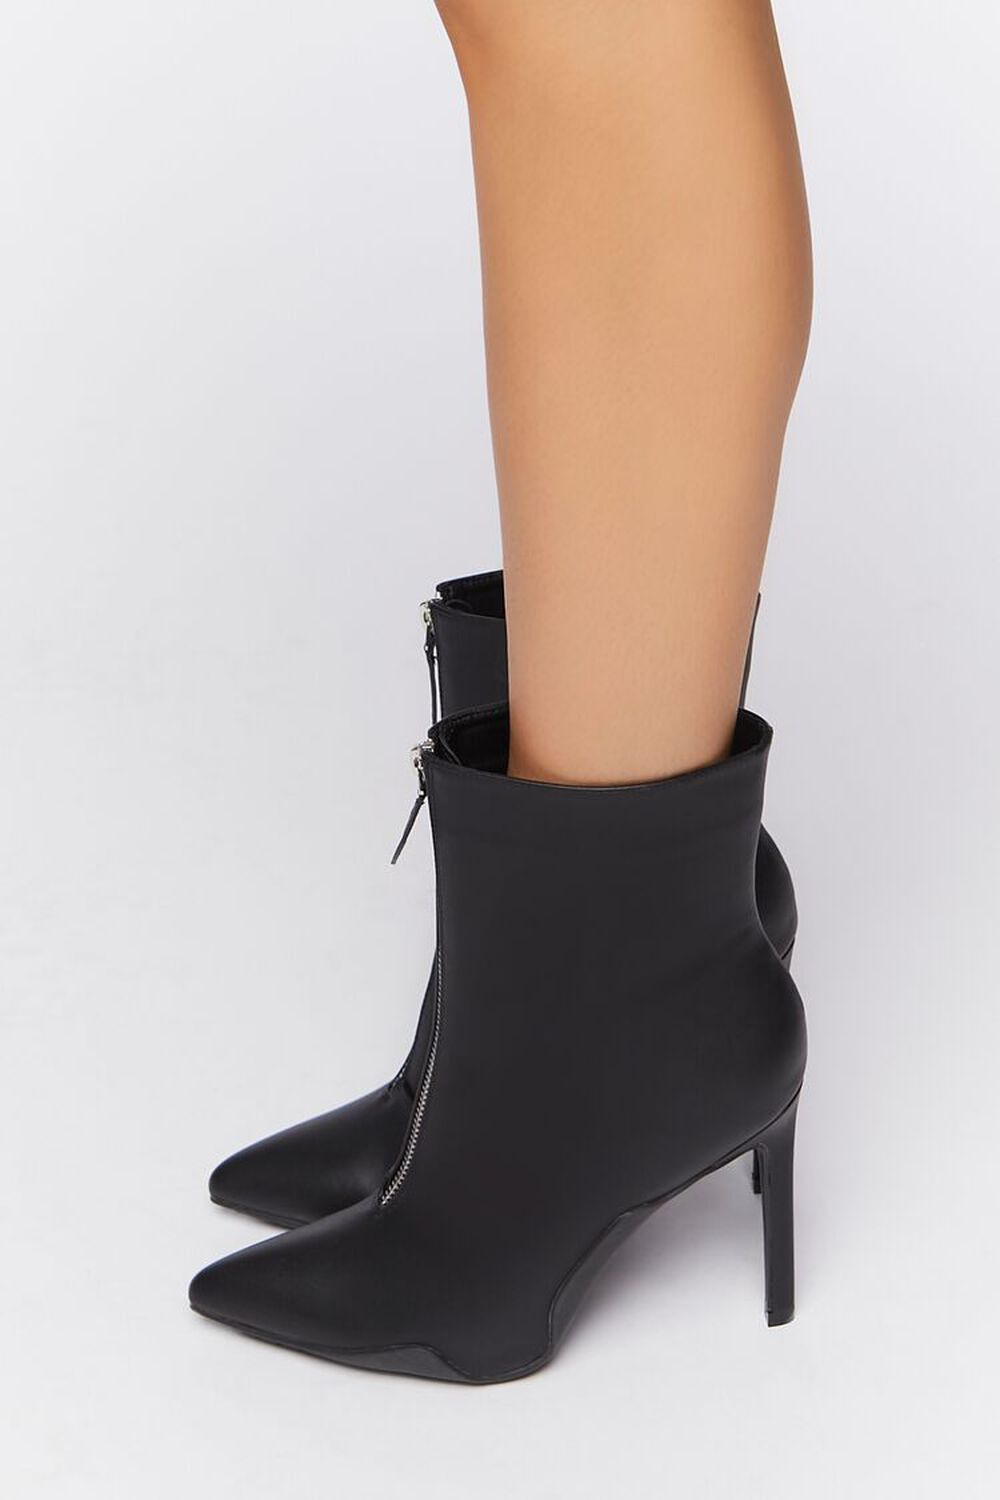 BLACK Pointed Stiletto Booties, image 2